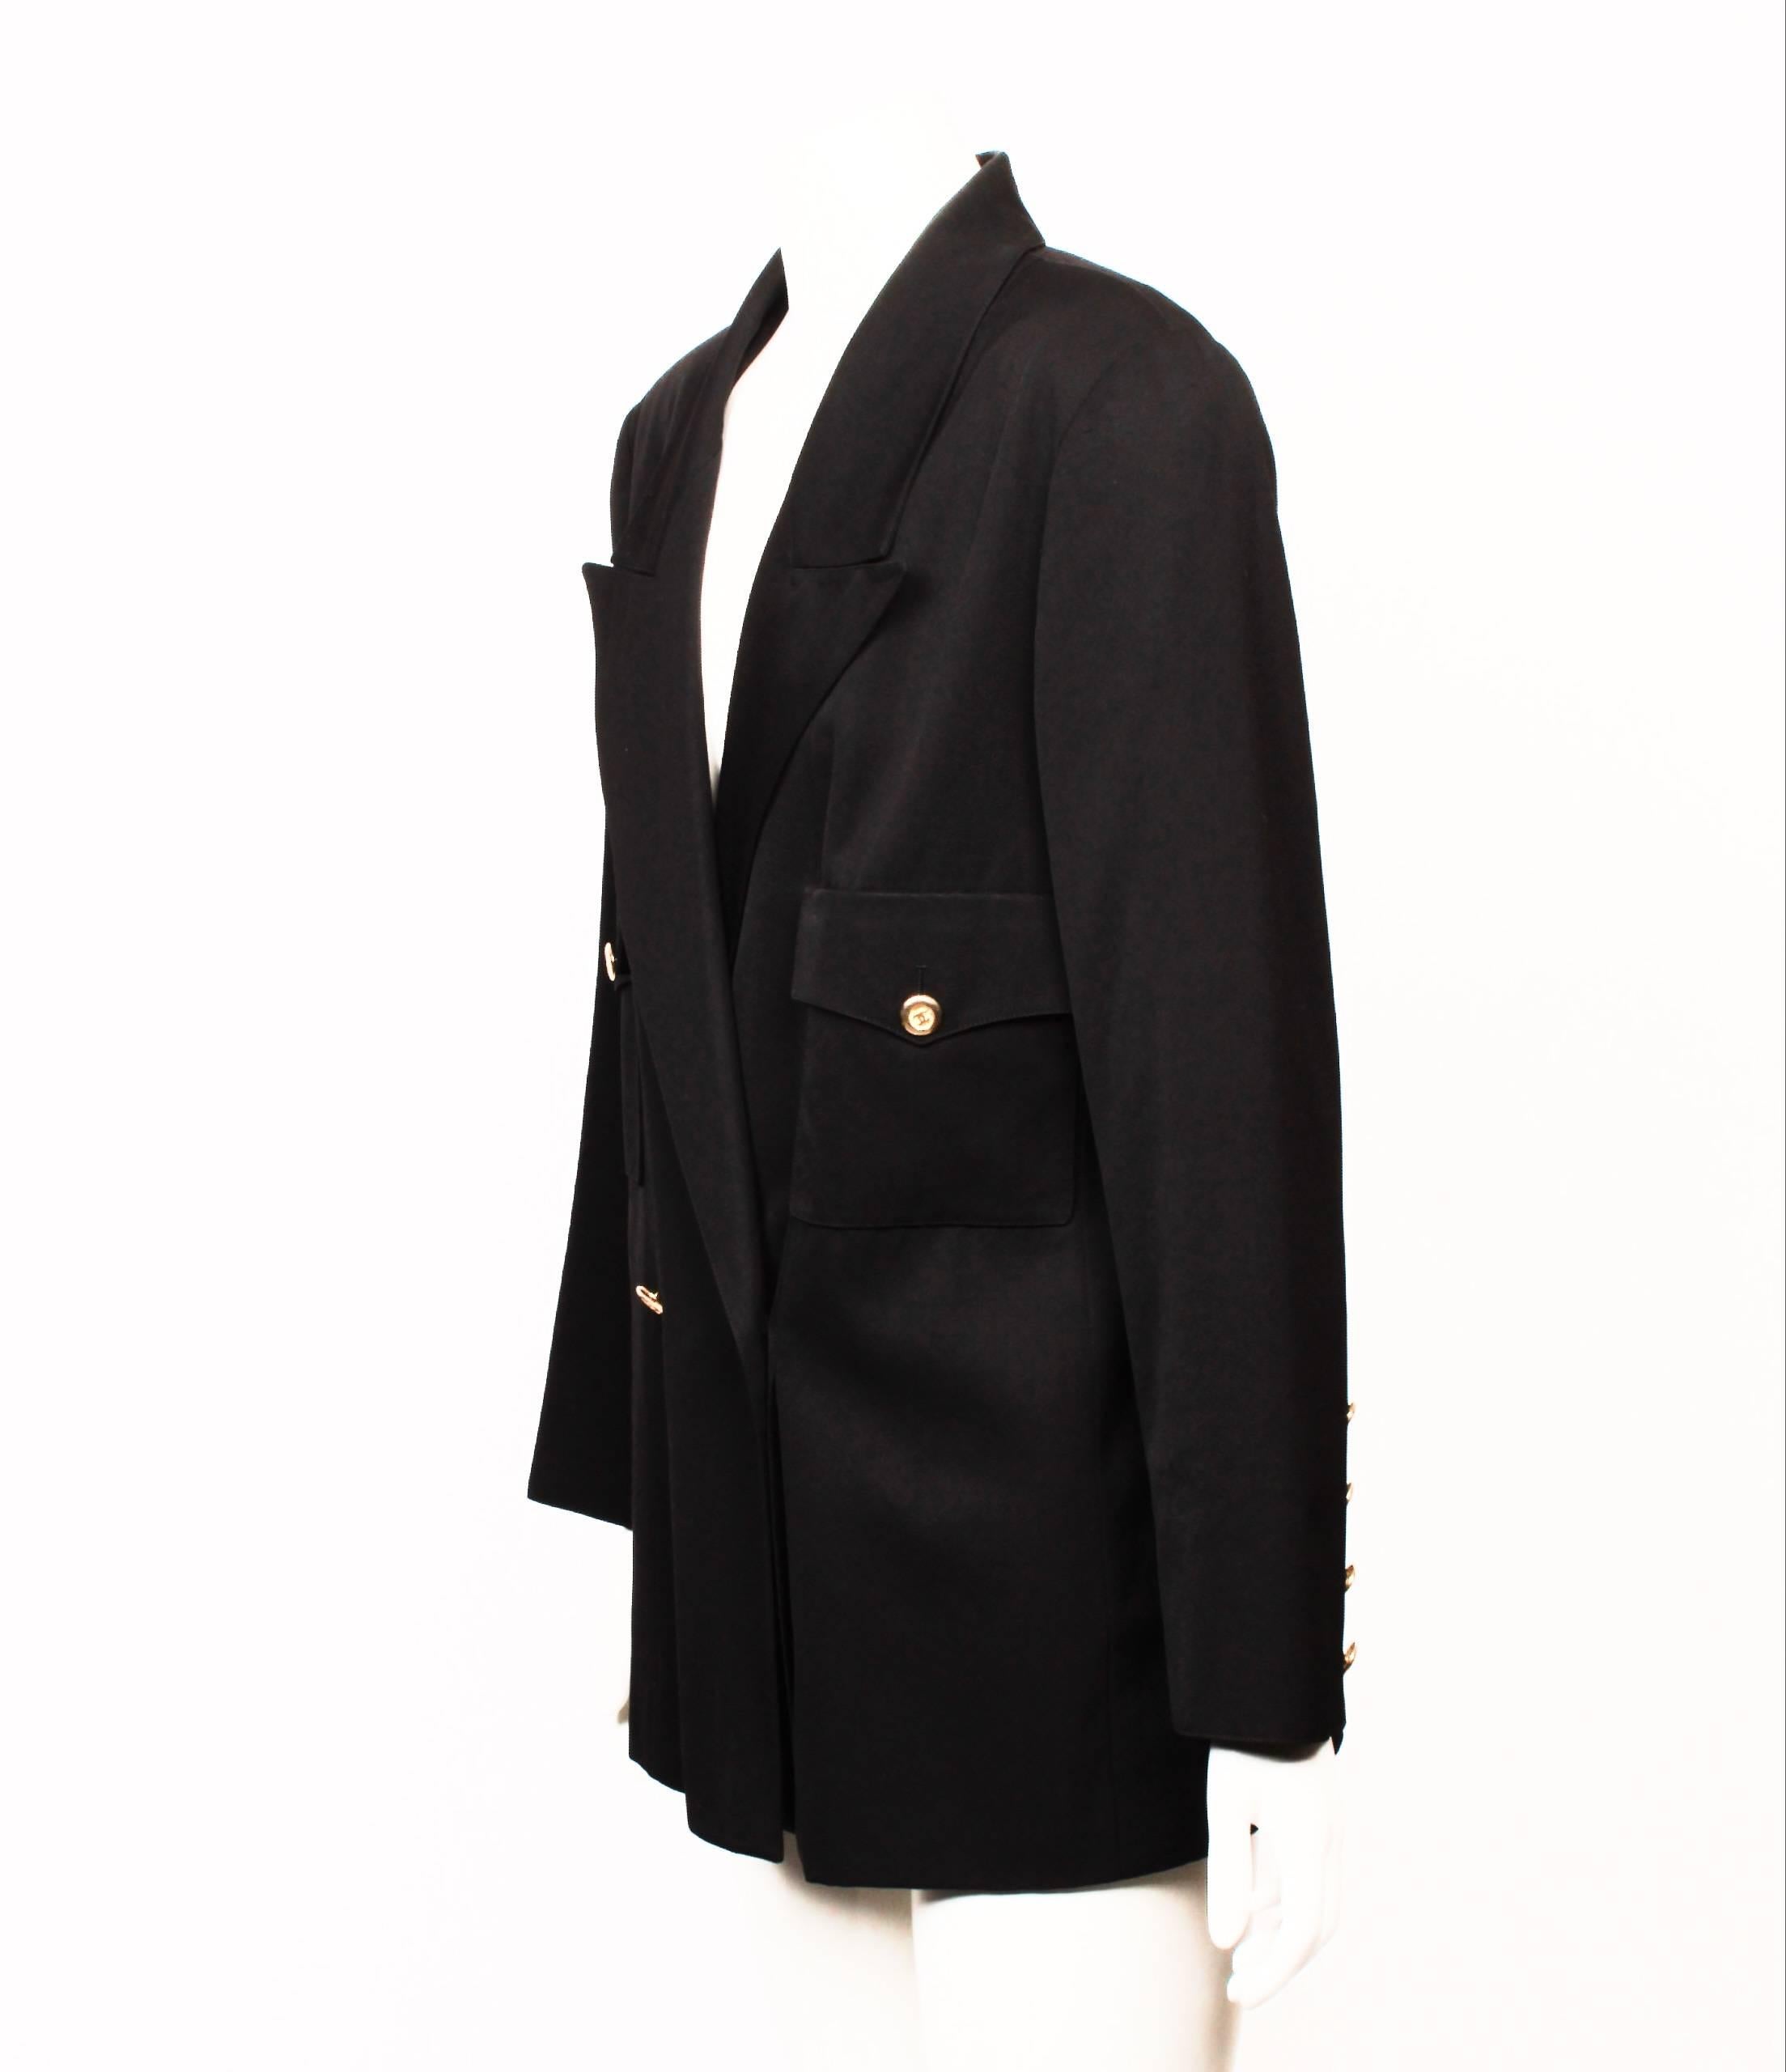 Classic 1980's Chanel black double breasted blazer made from 100% wool with silk lining. 
Gorgeous golden CC logo buttons on front closure and sleeve vent. This item has an original factory hand written sample label attached. Made in France. Size